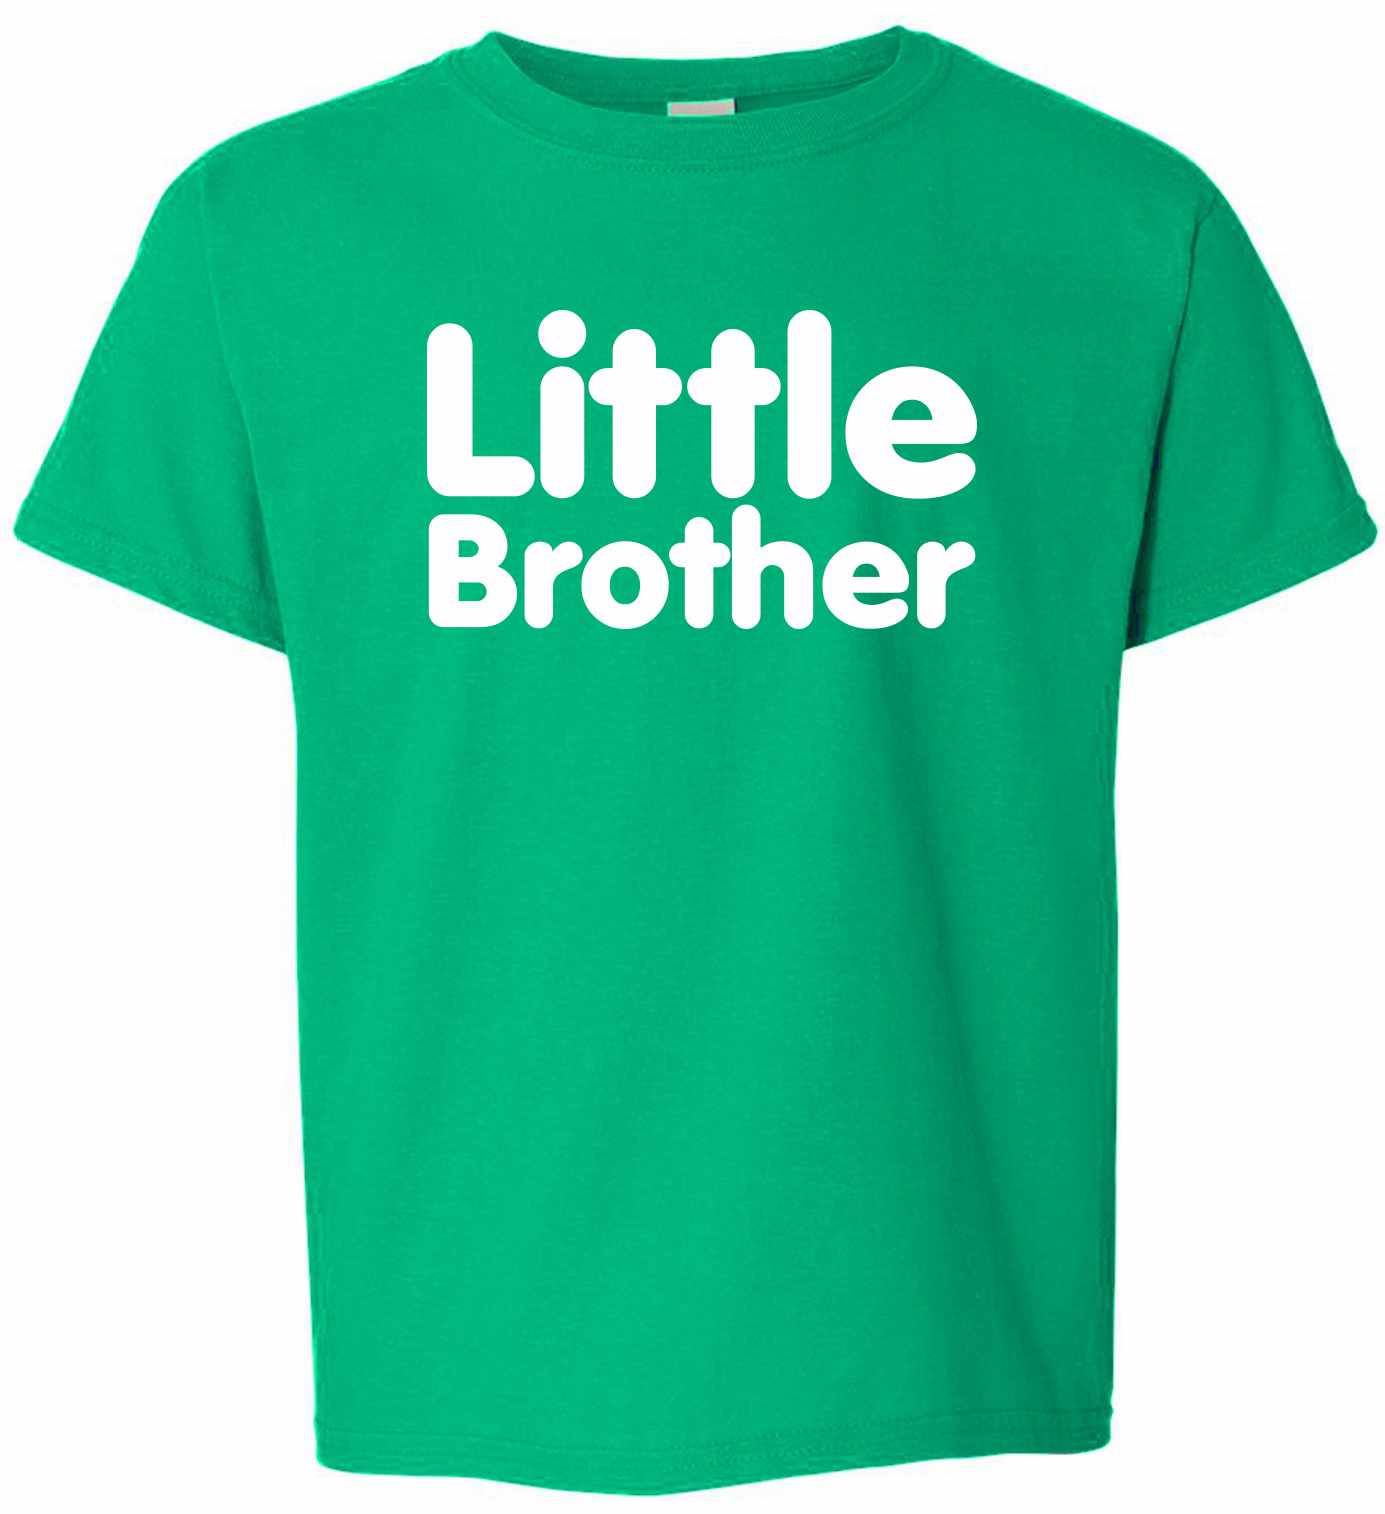 Little Brother on Kids T-Shirt